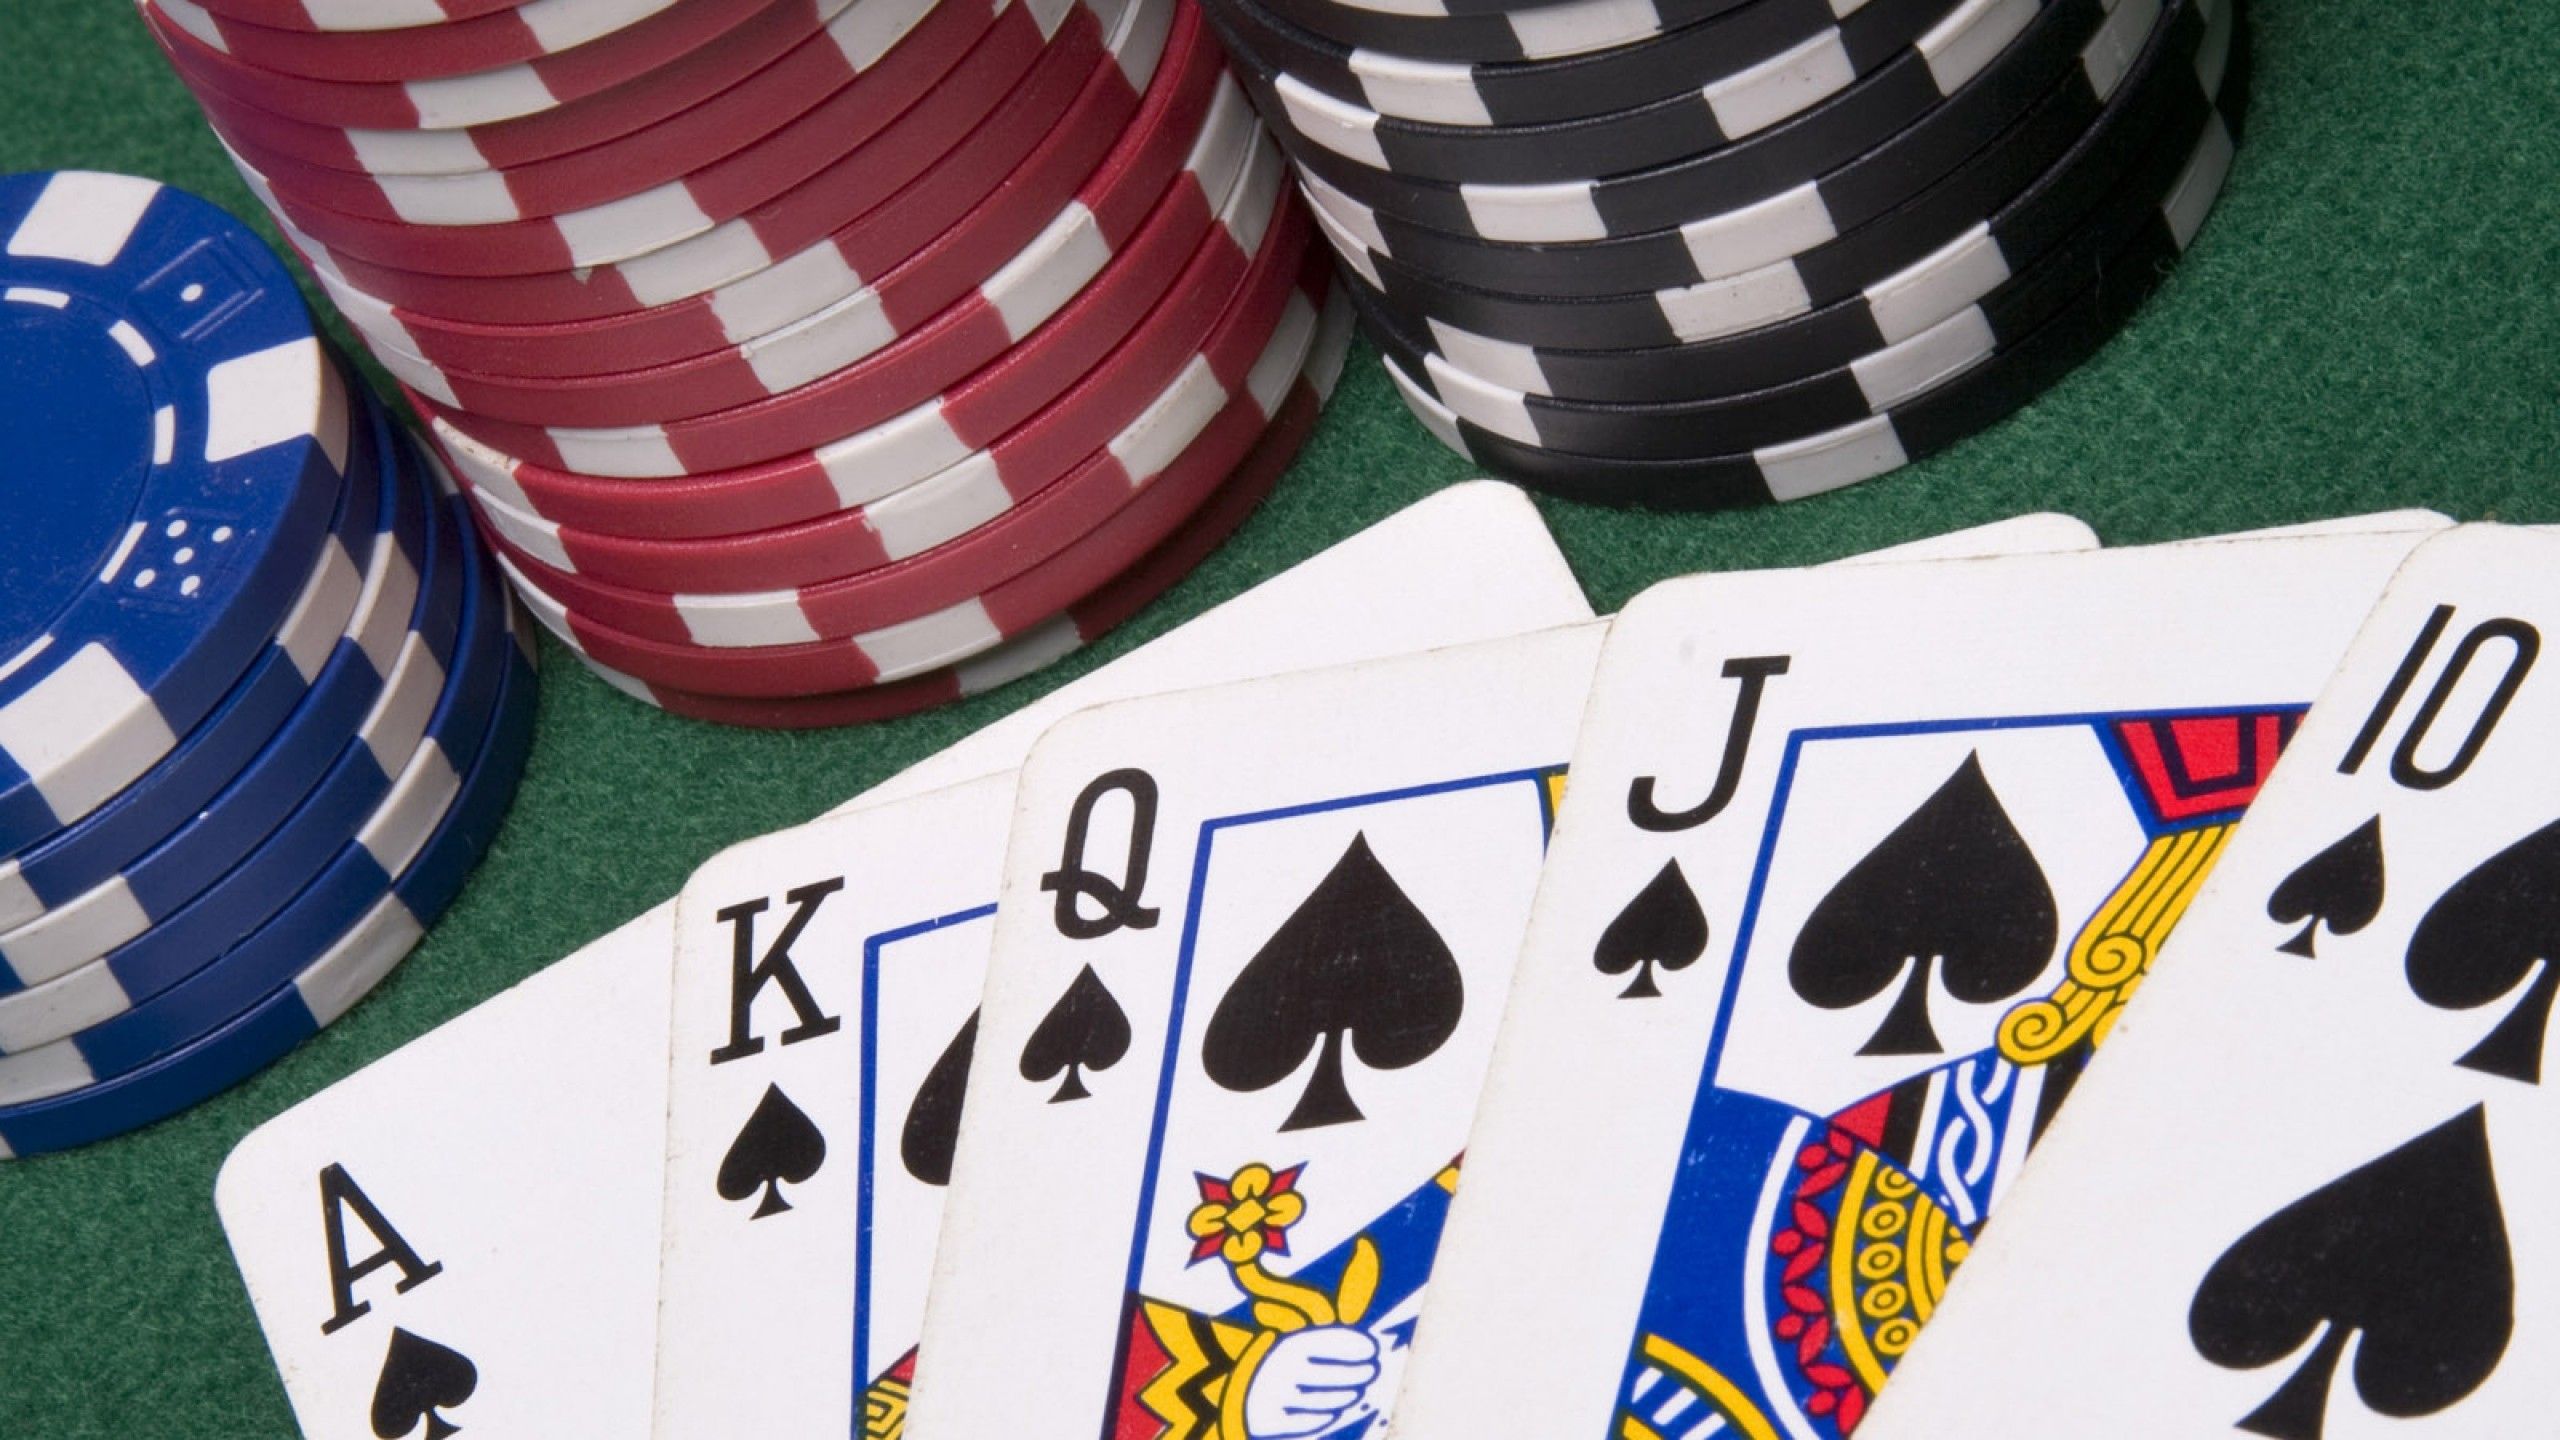 Online Gambling establishment Poker Gambling — How To Win The Most By Creating A graphic post thumbnail image